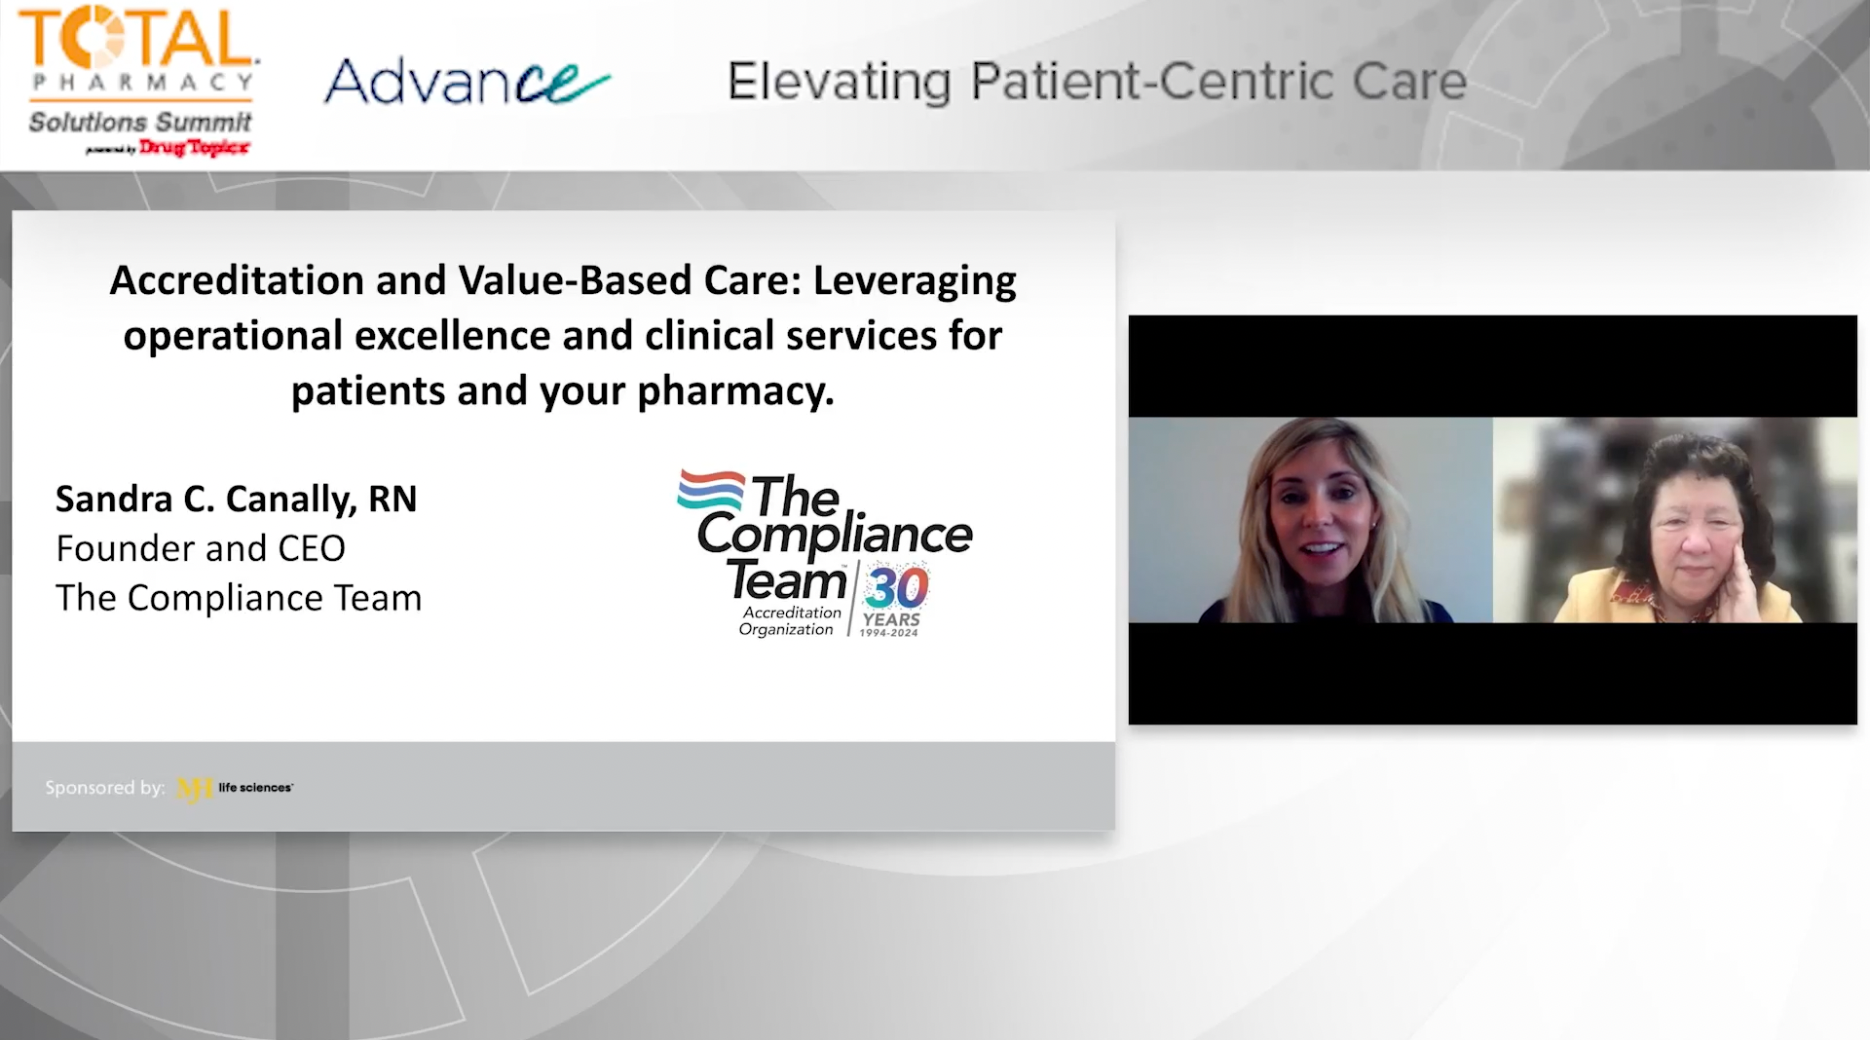 Accreditation and Value-Based Care: Leveraging Operational Excellence and Clinical Services for Patients and Your Pharmacy